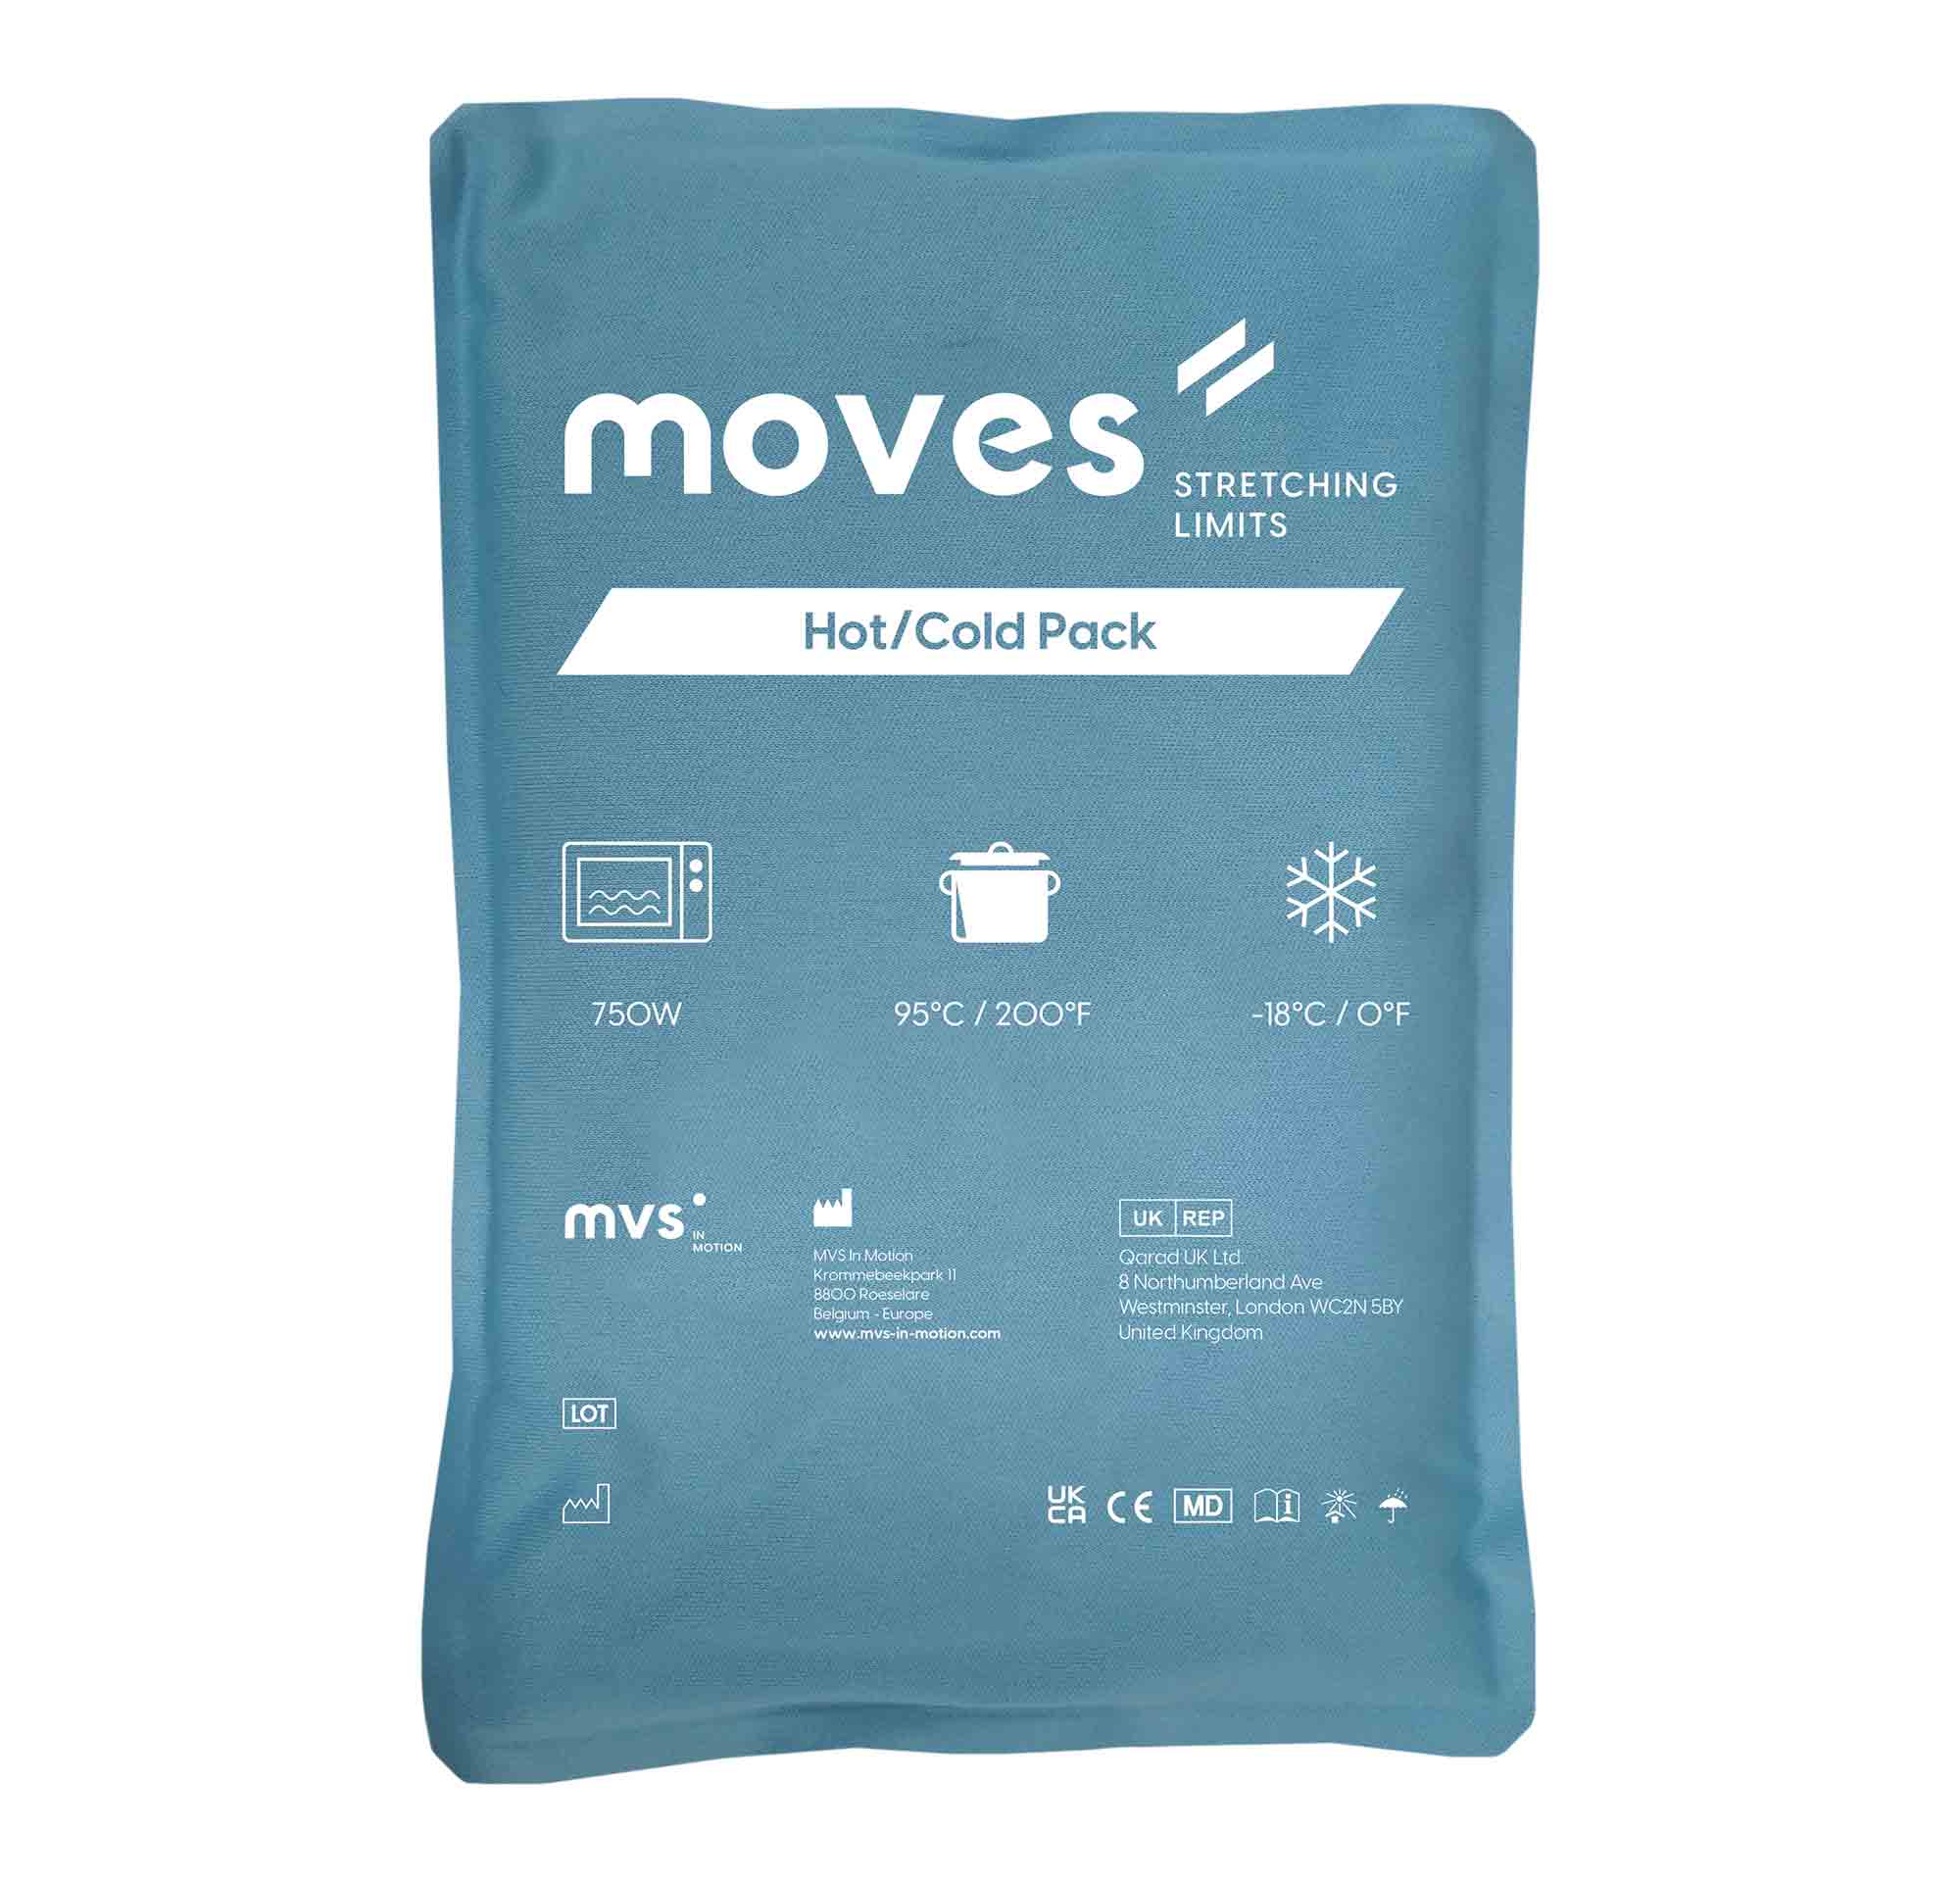 Moves Hot/Cold Pack Soft Touch, large, 25 x 35 cm